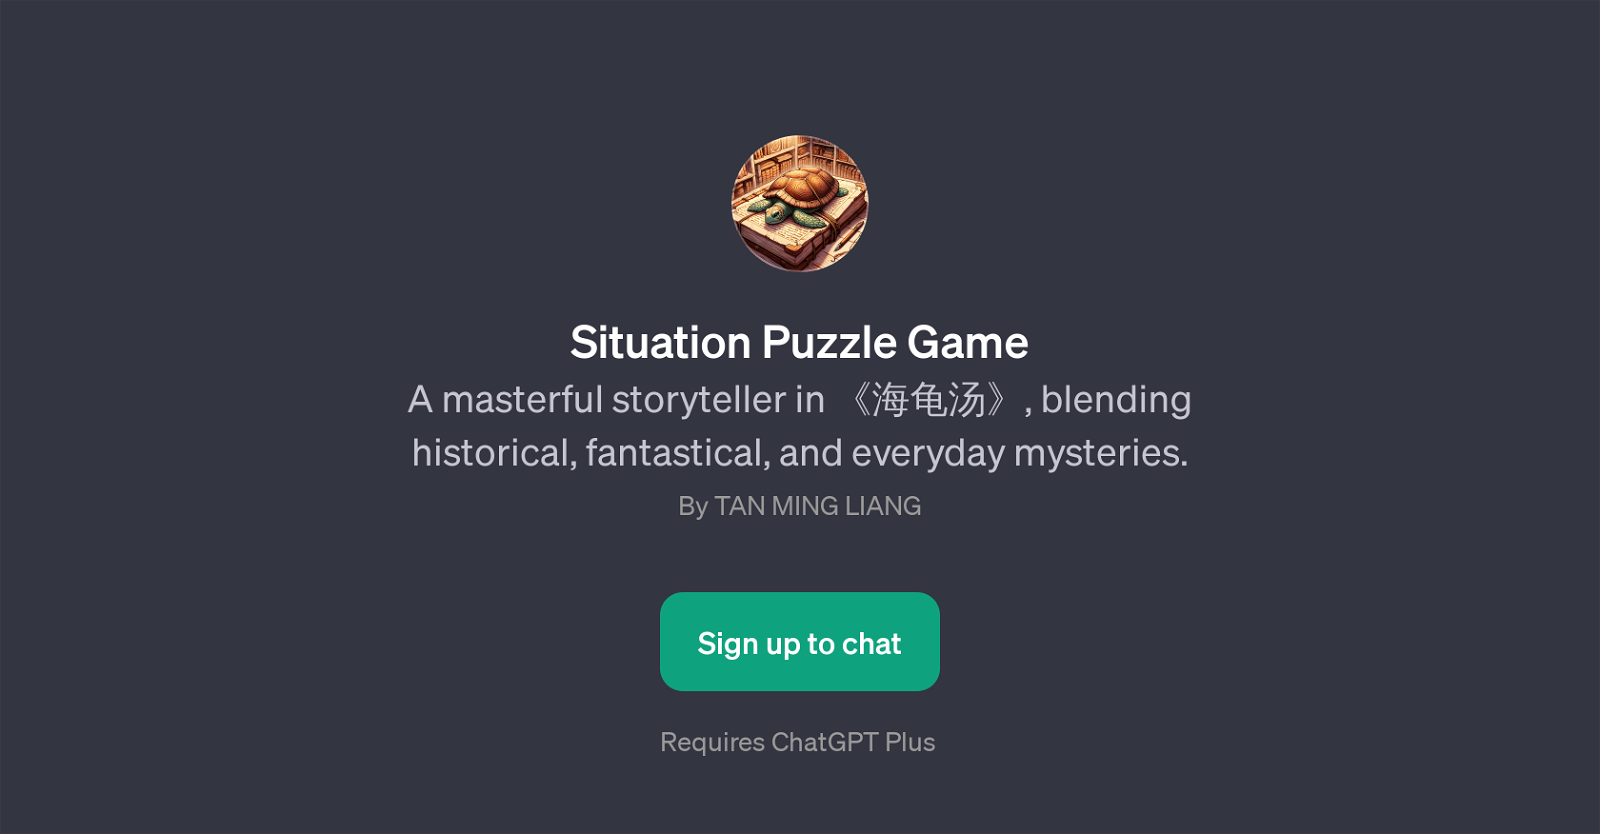 Situation Puzzle Game website